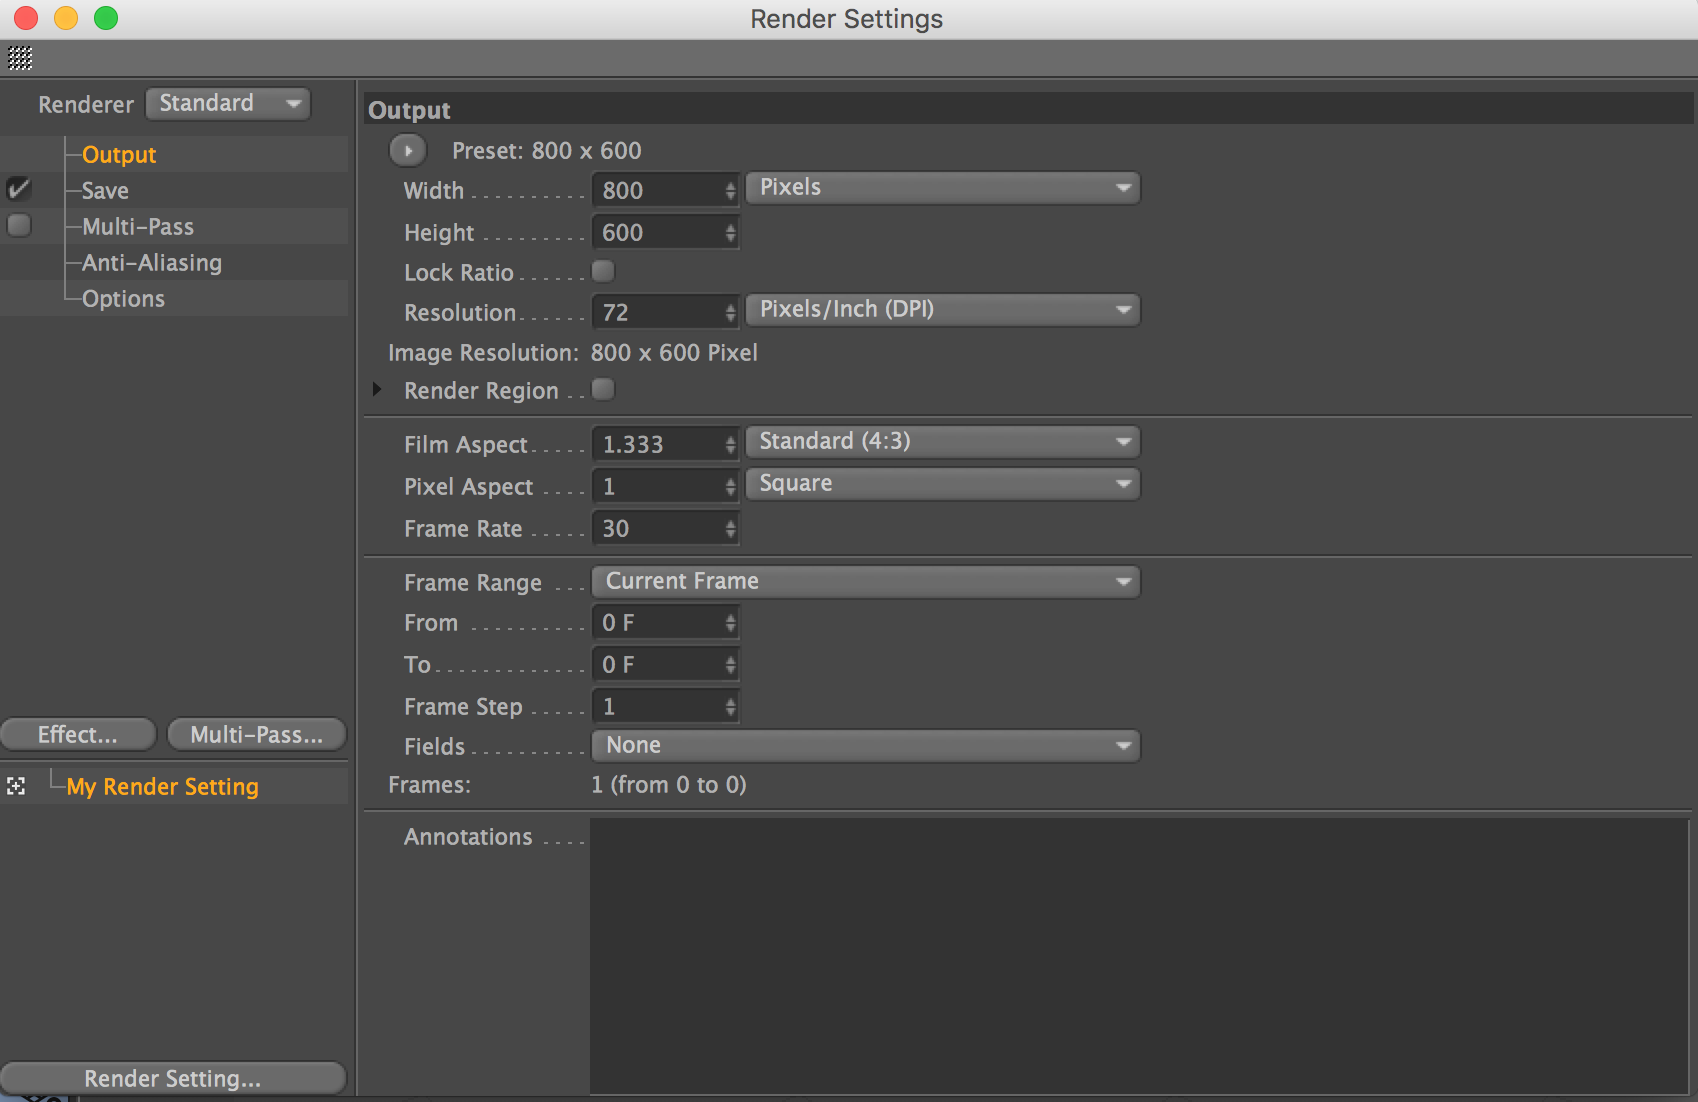 Option settings. Octane settings. Render output. Вкладку setting and options. Import render